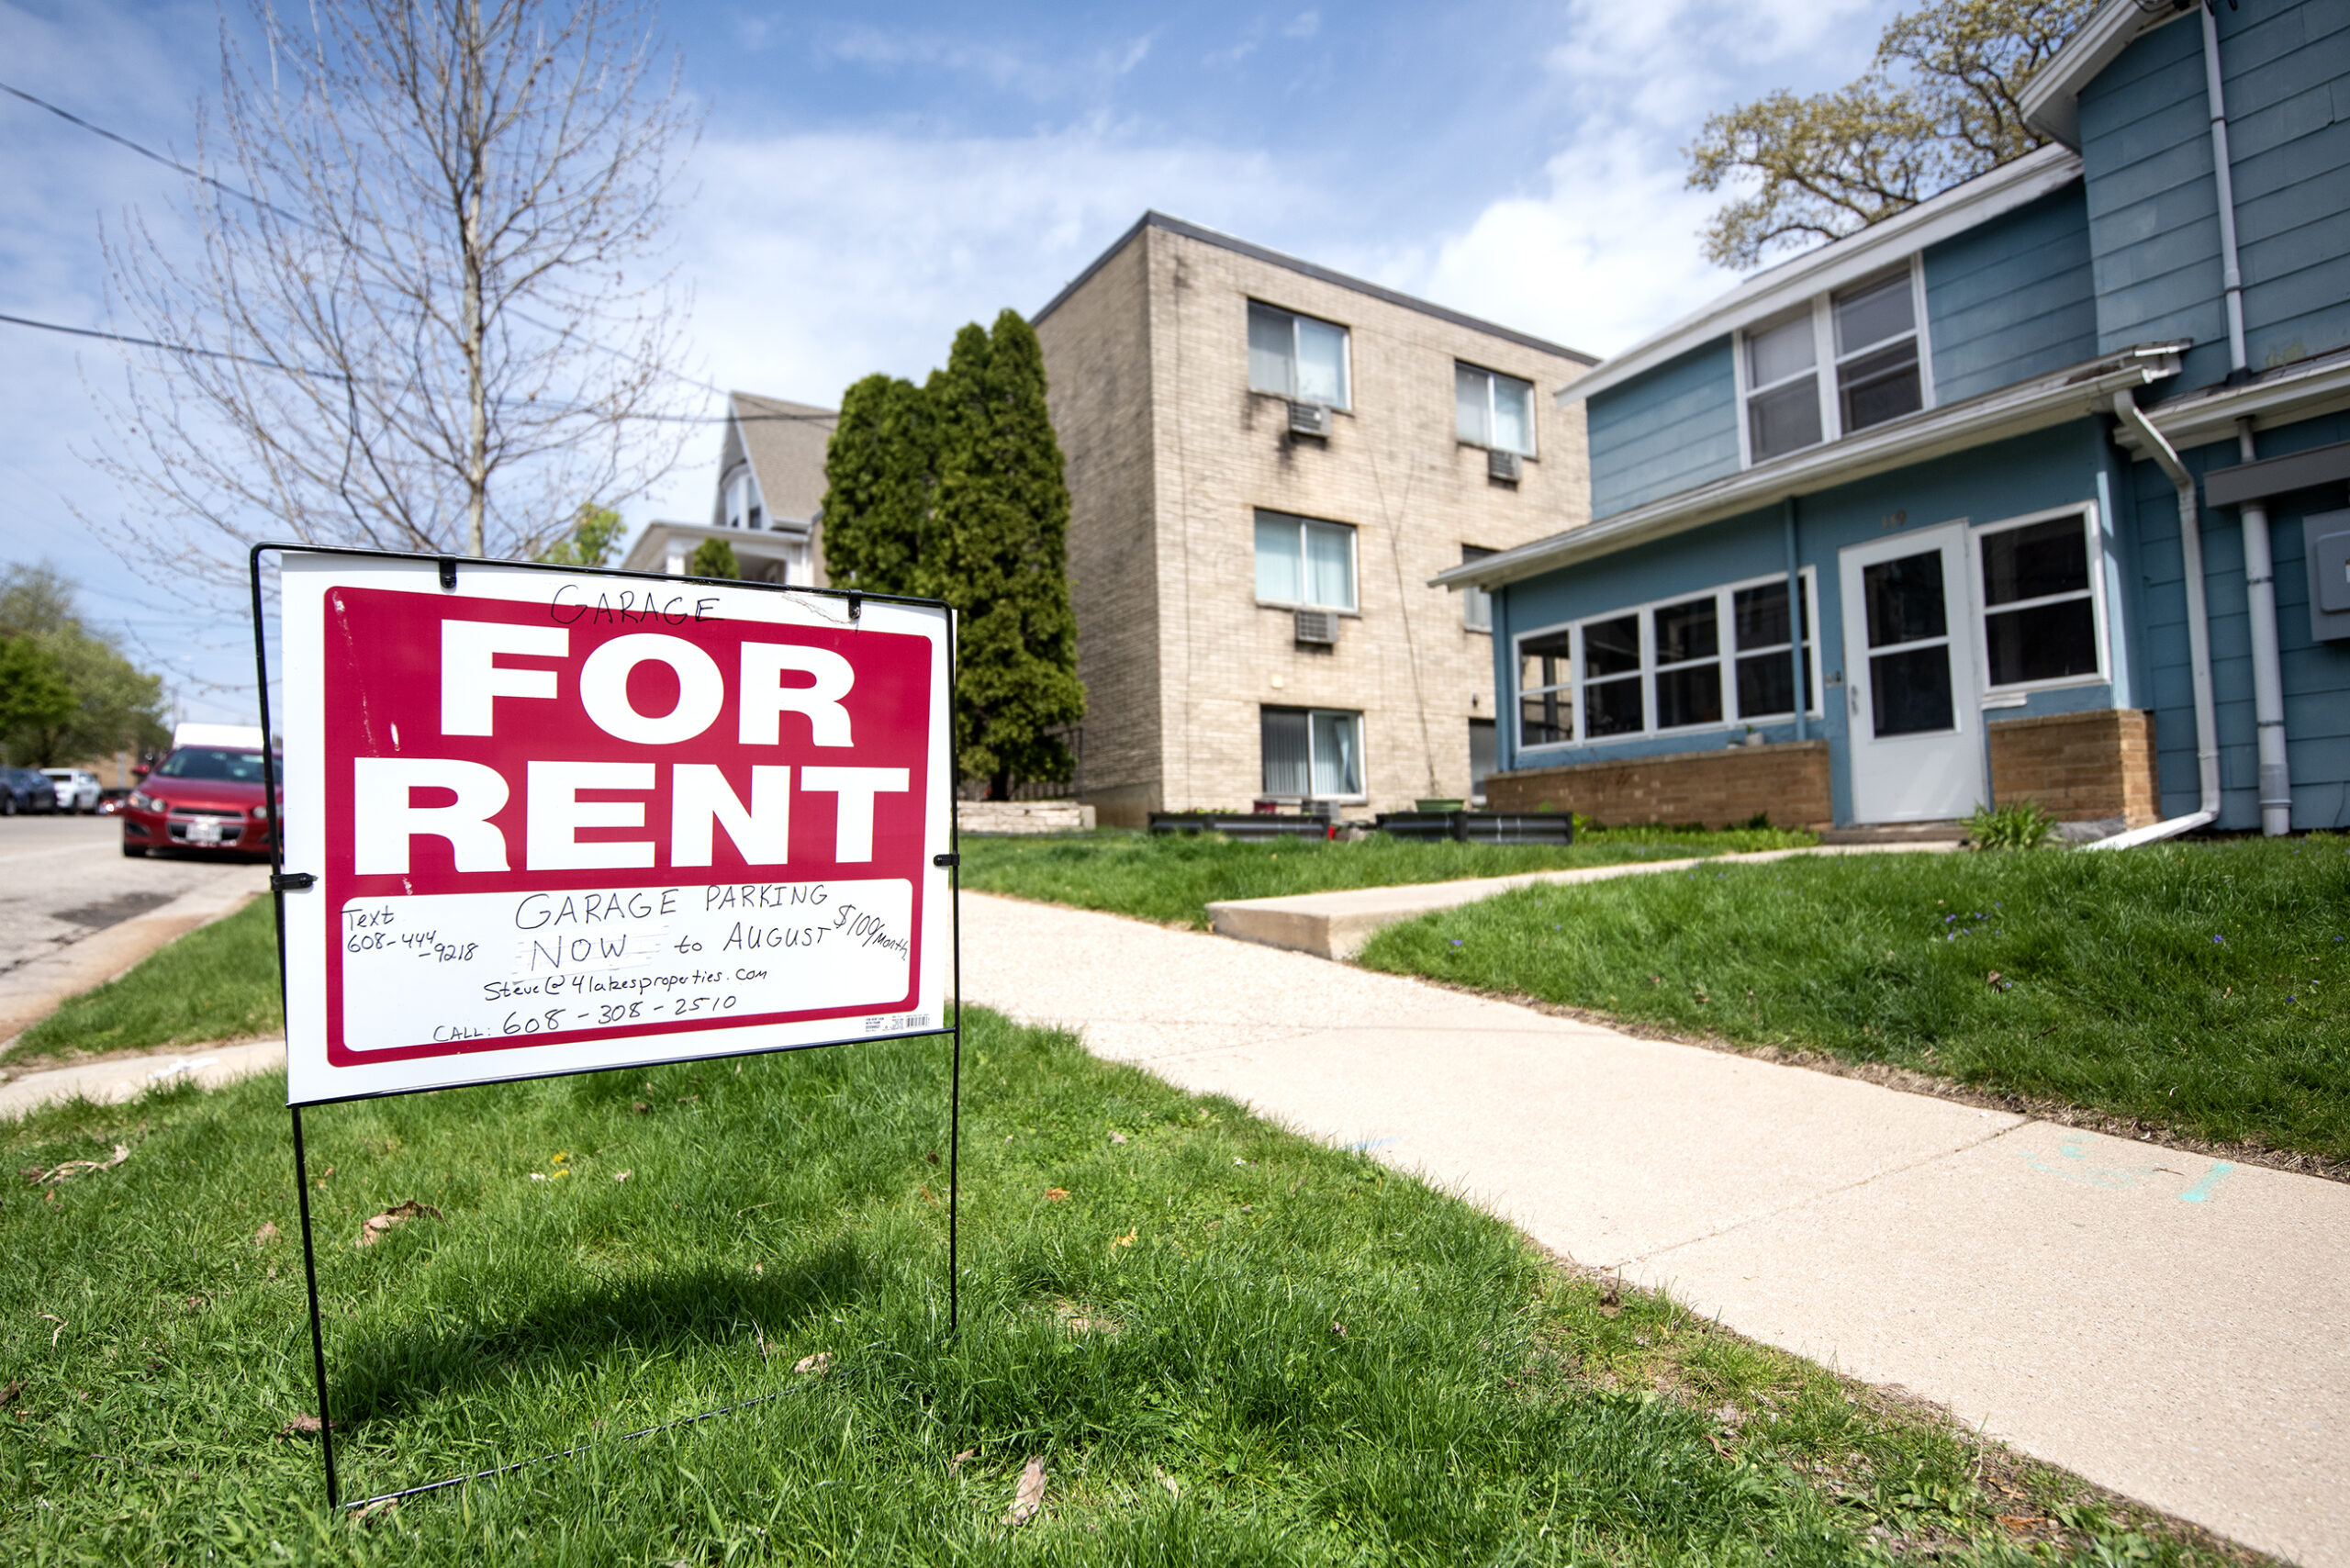 A lawn sign says "FOR RENT" with apartment details listed.